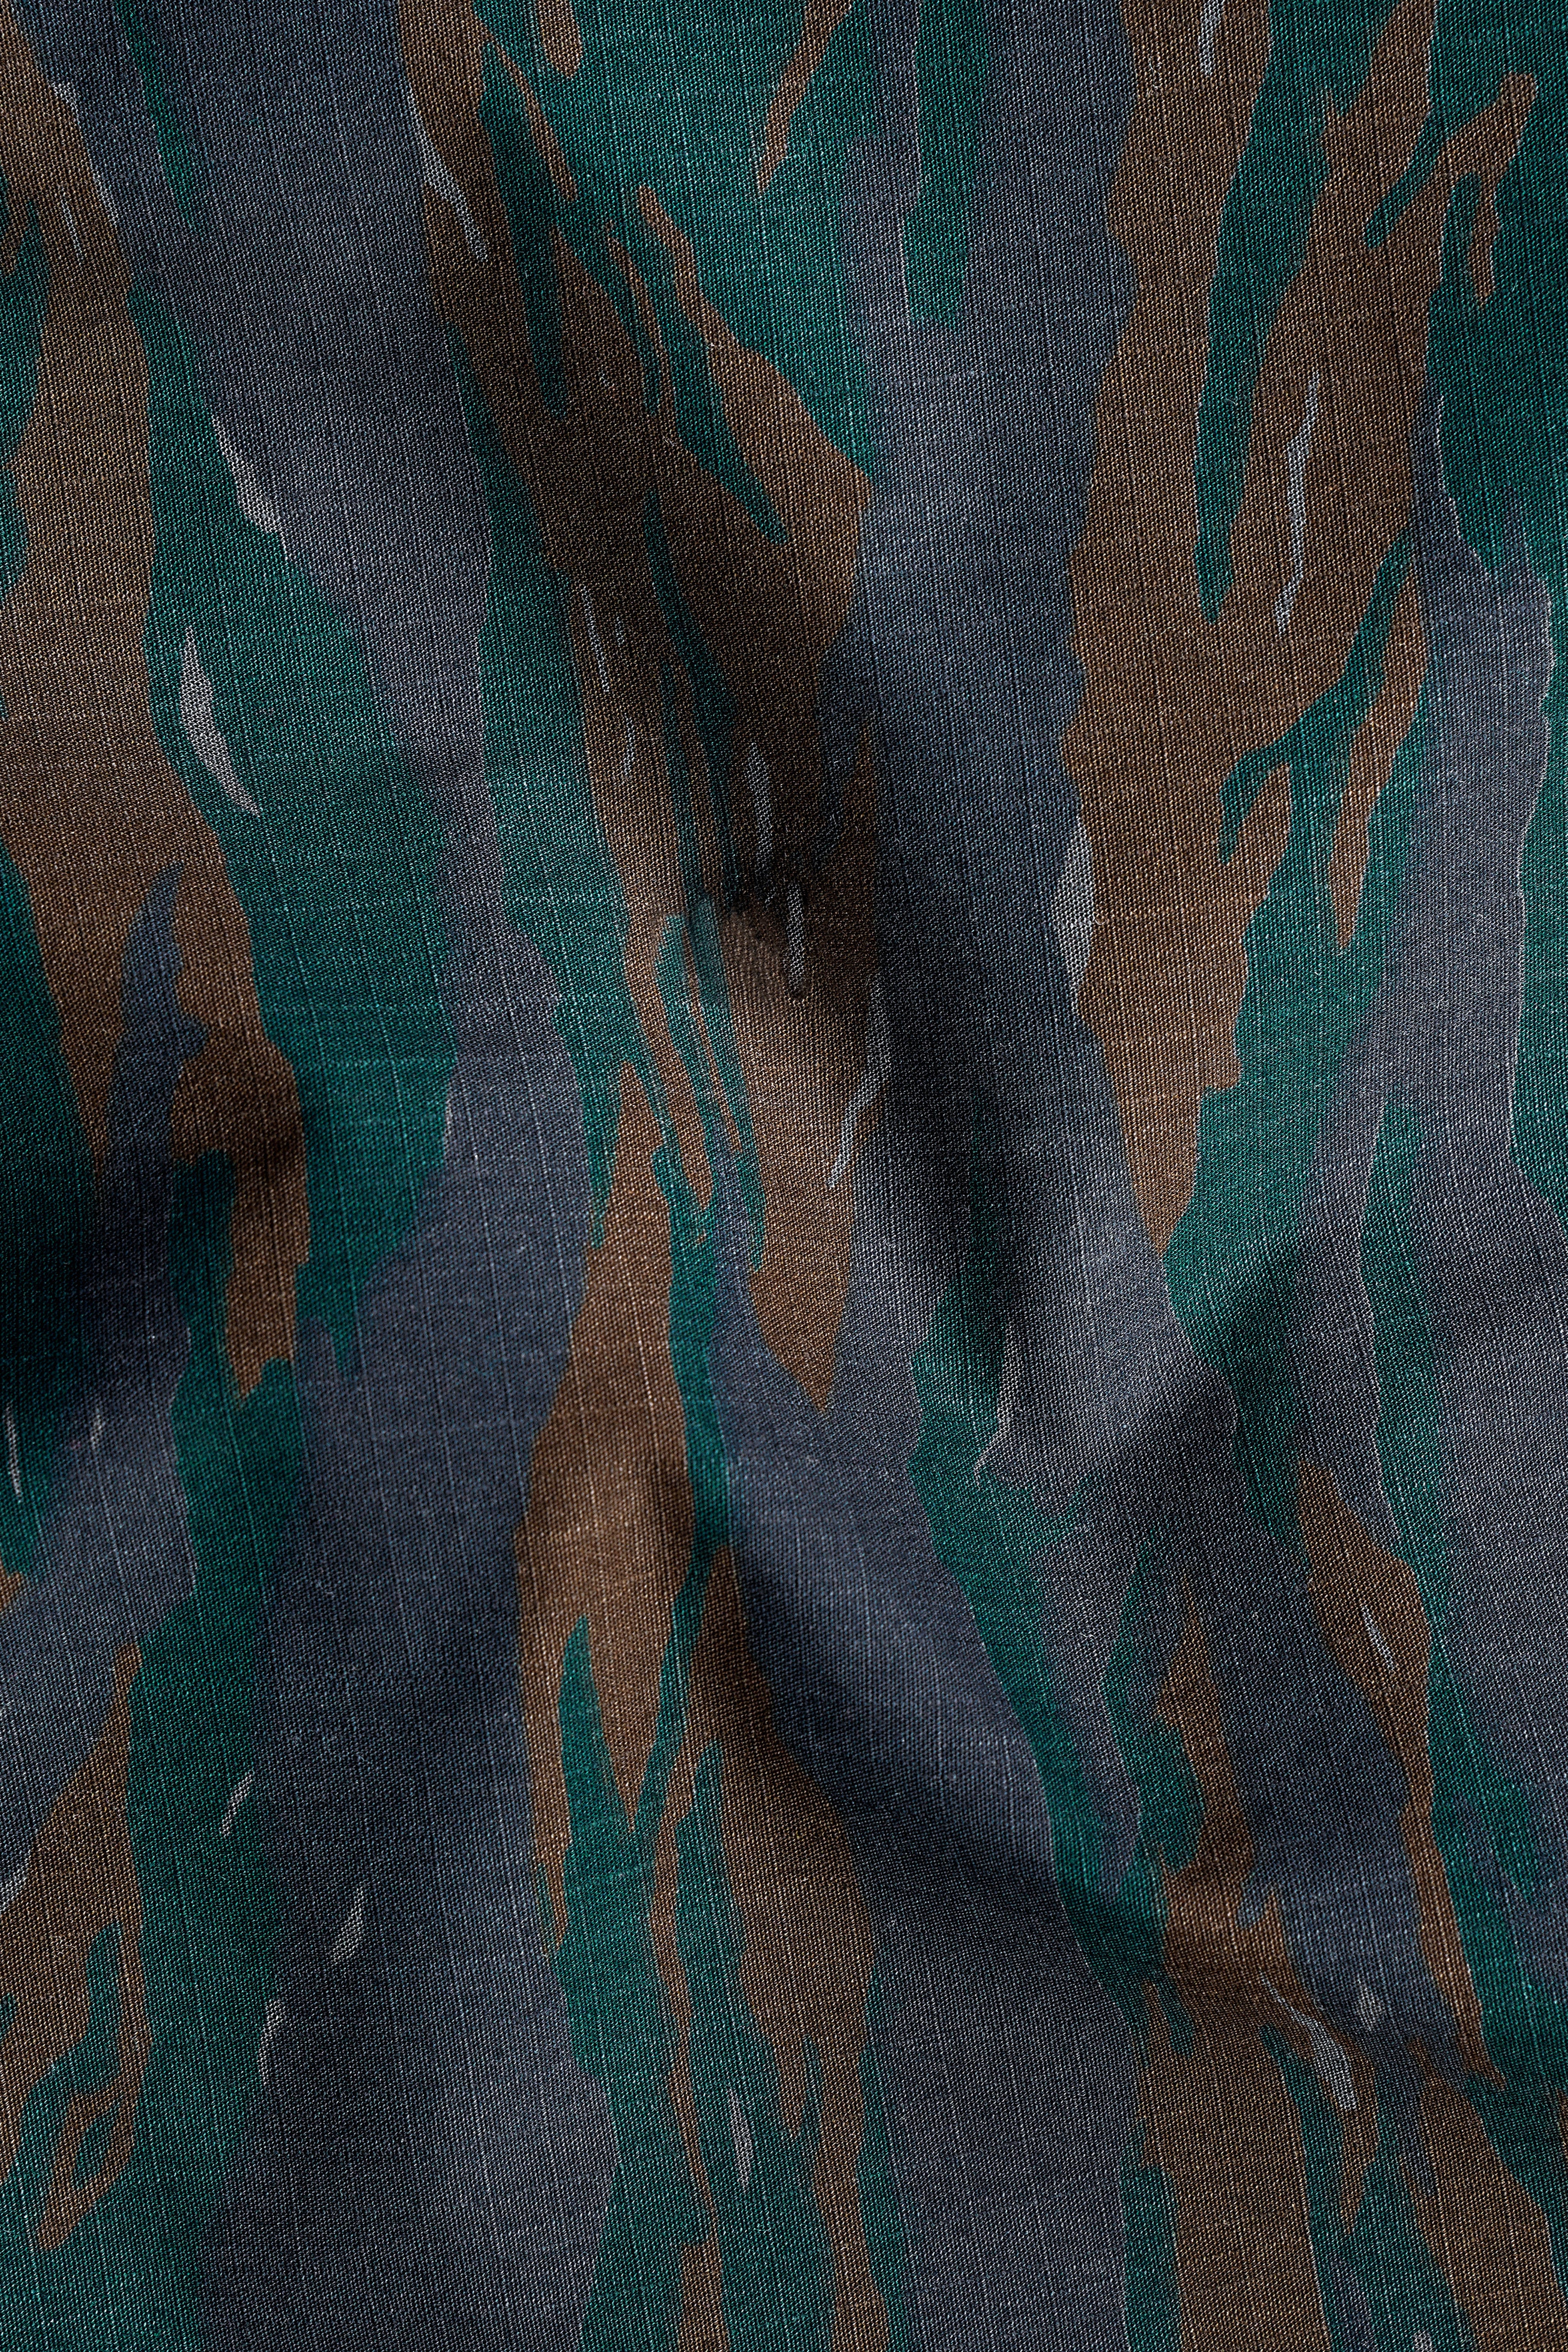 Spectra Green with Charcoal Gray Camouflage Royal Oxford Shirt